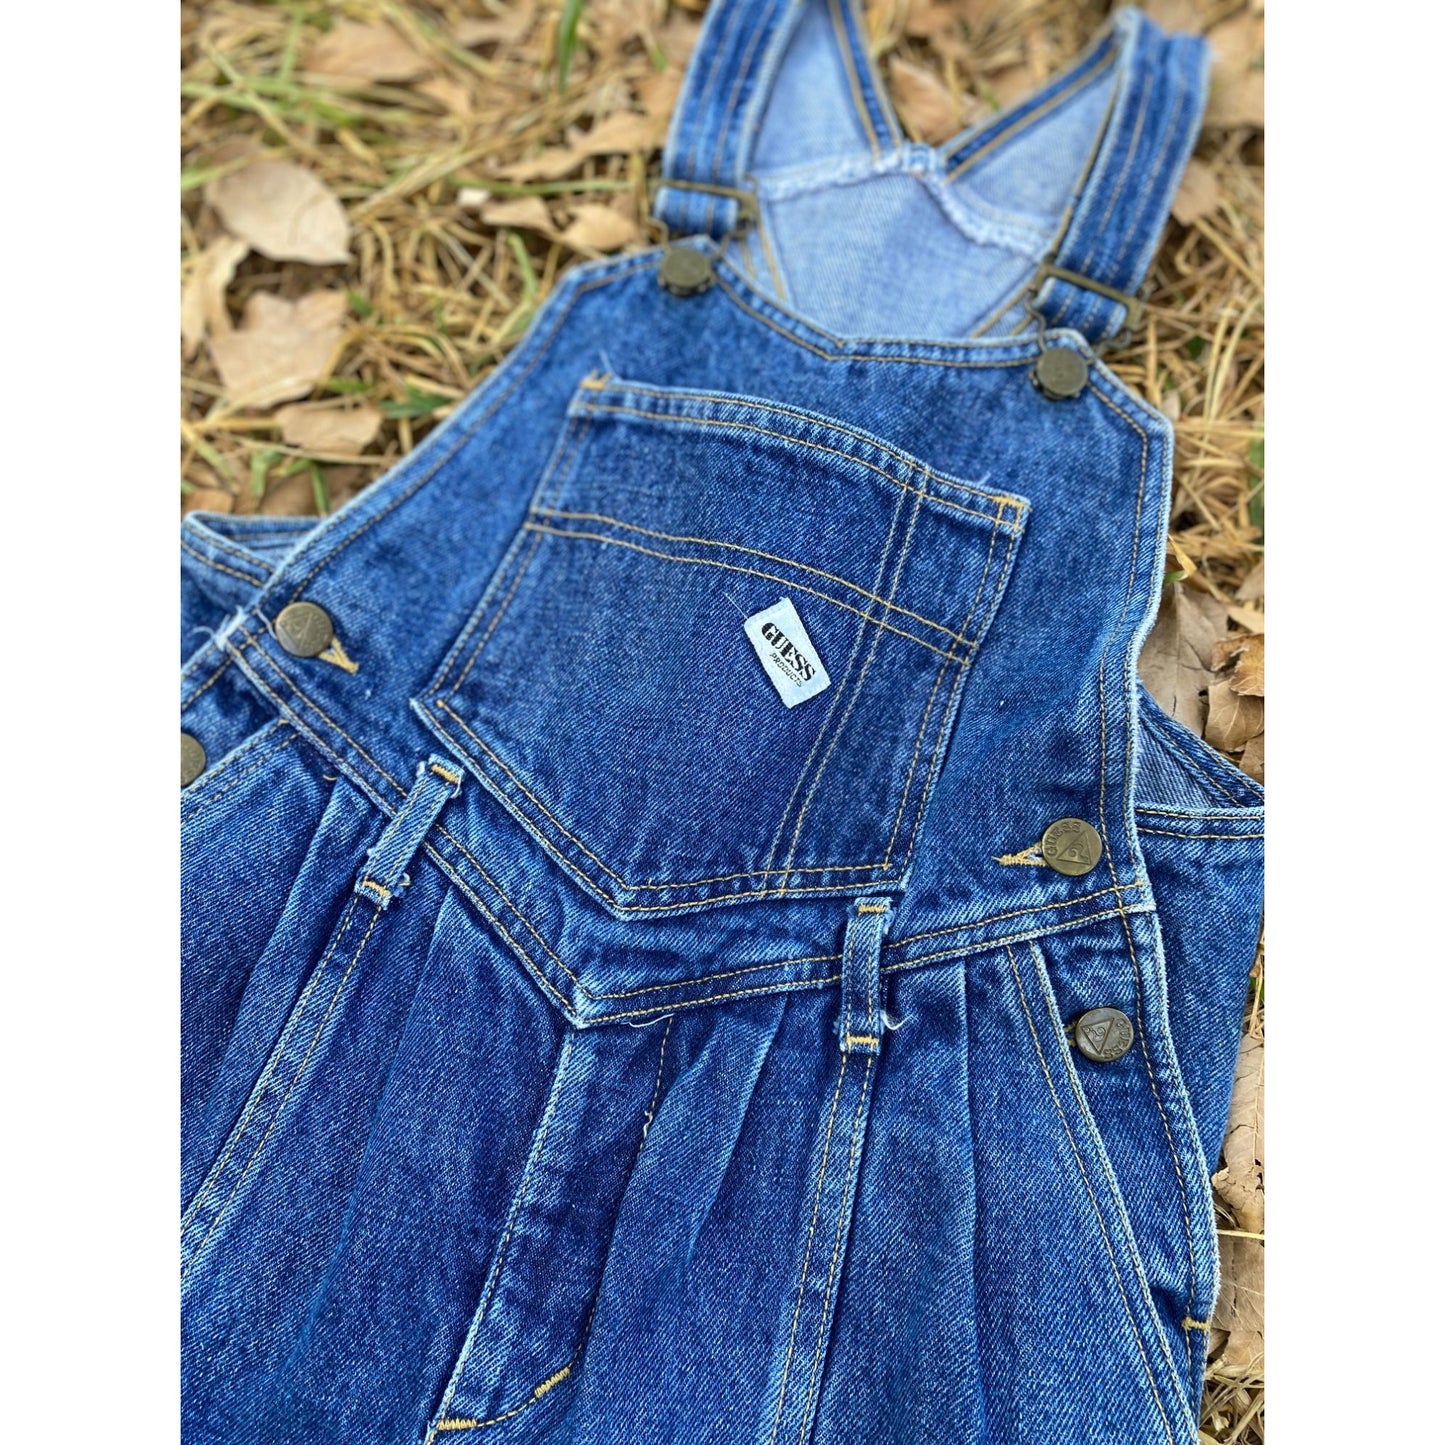 80/90's Guess Girls Denim Jean Overalls Size 10